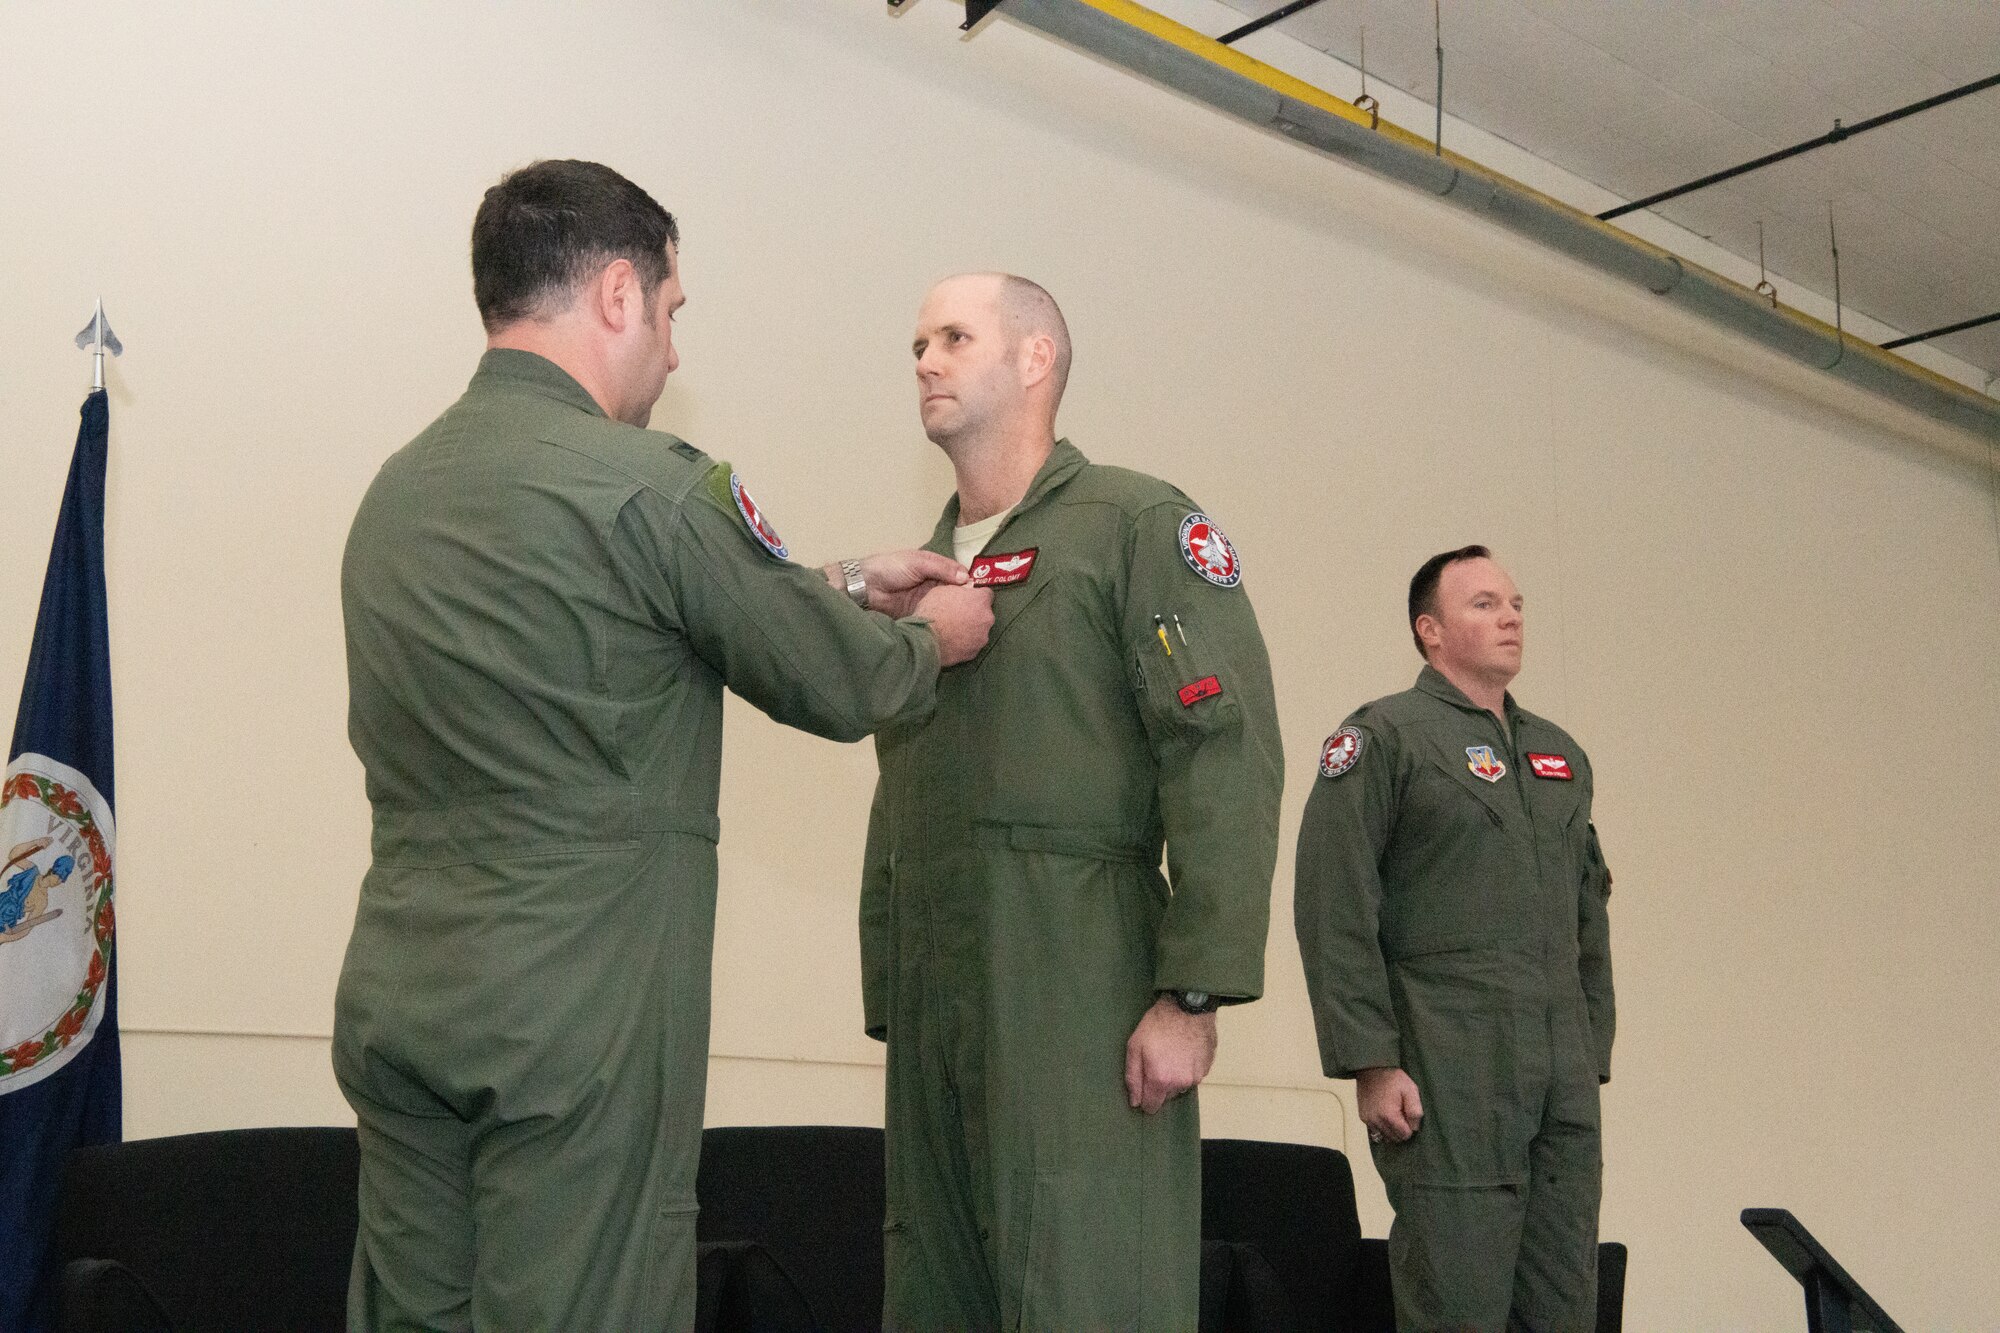 Airmen at a change of command ceremony